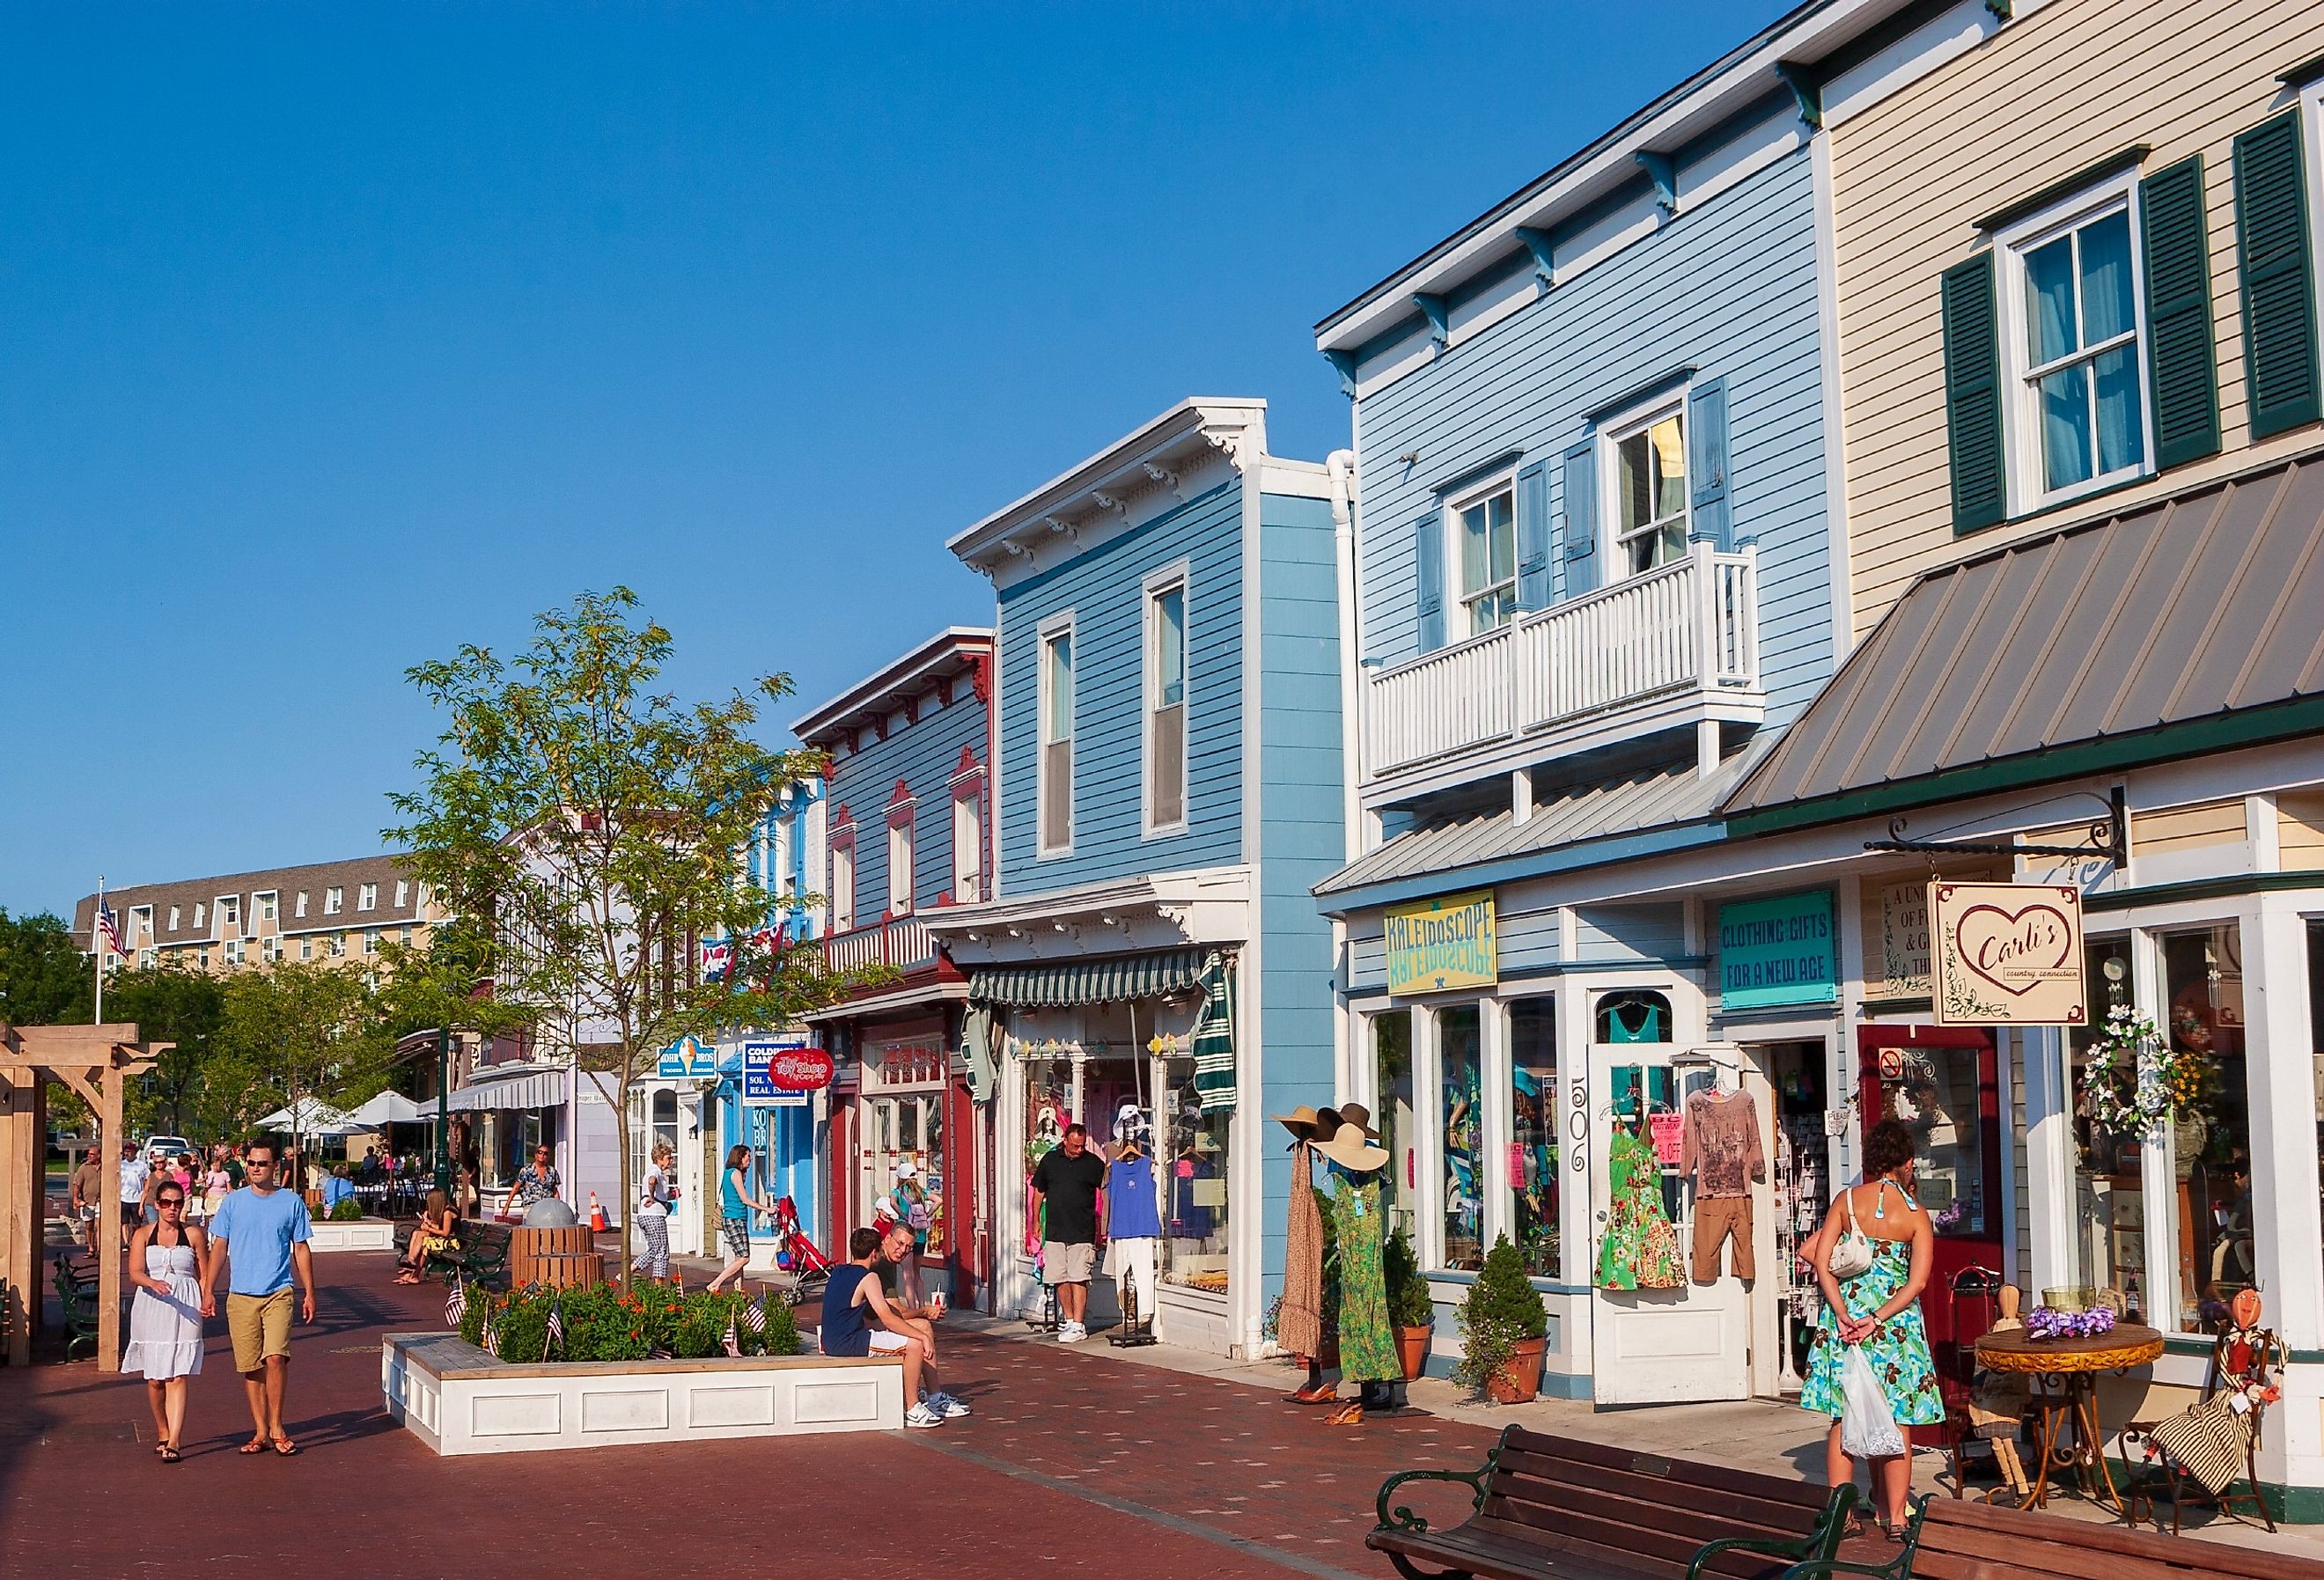 Tourists walk through Washington Street Mall, lined with boutiques, eateries and shops in Cape May, New Jersey. Image credit JWCohen via Shutterstock